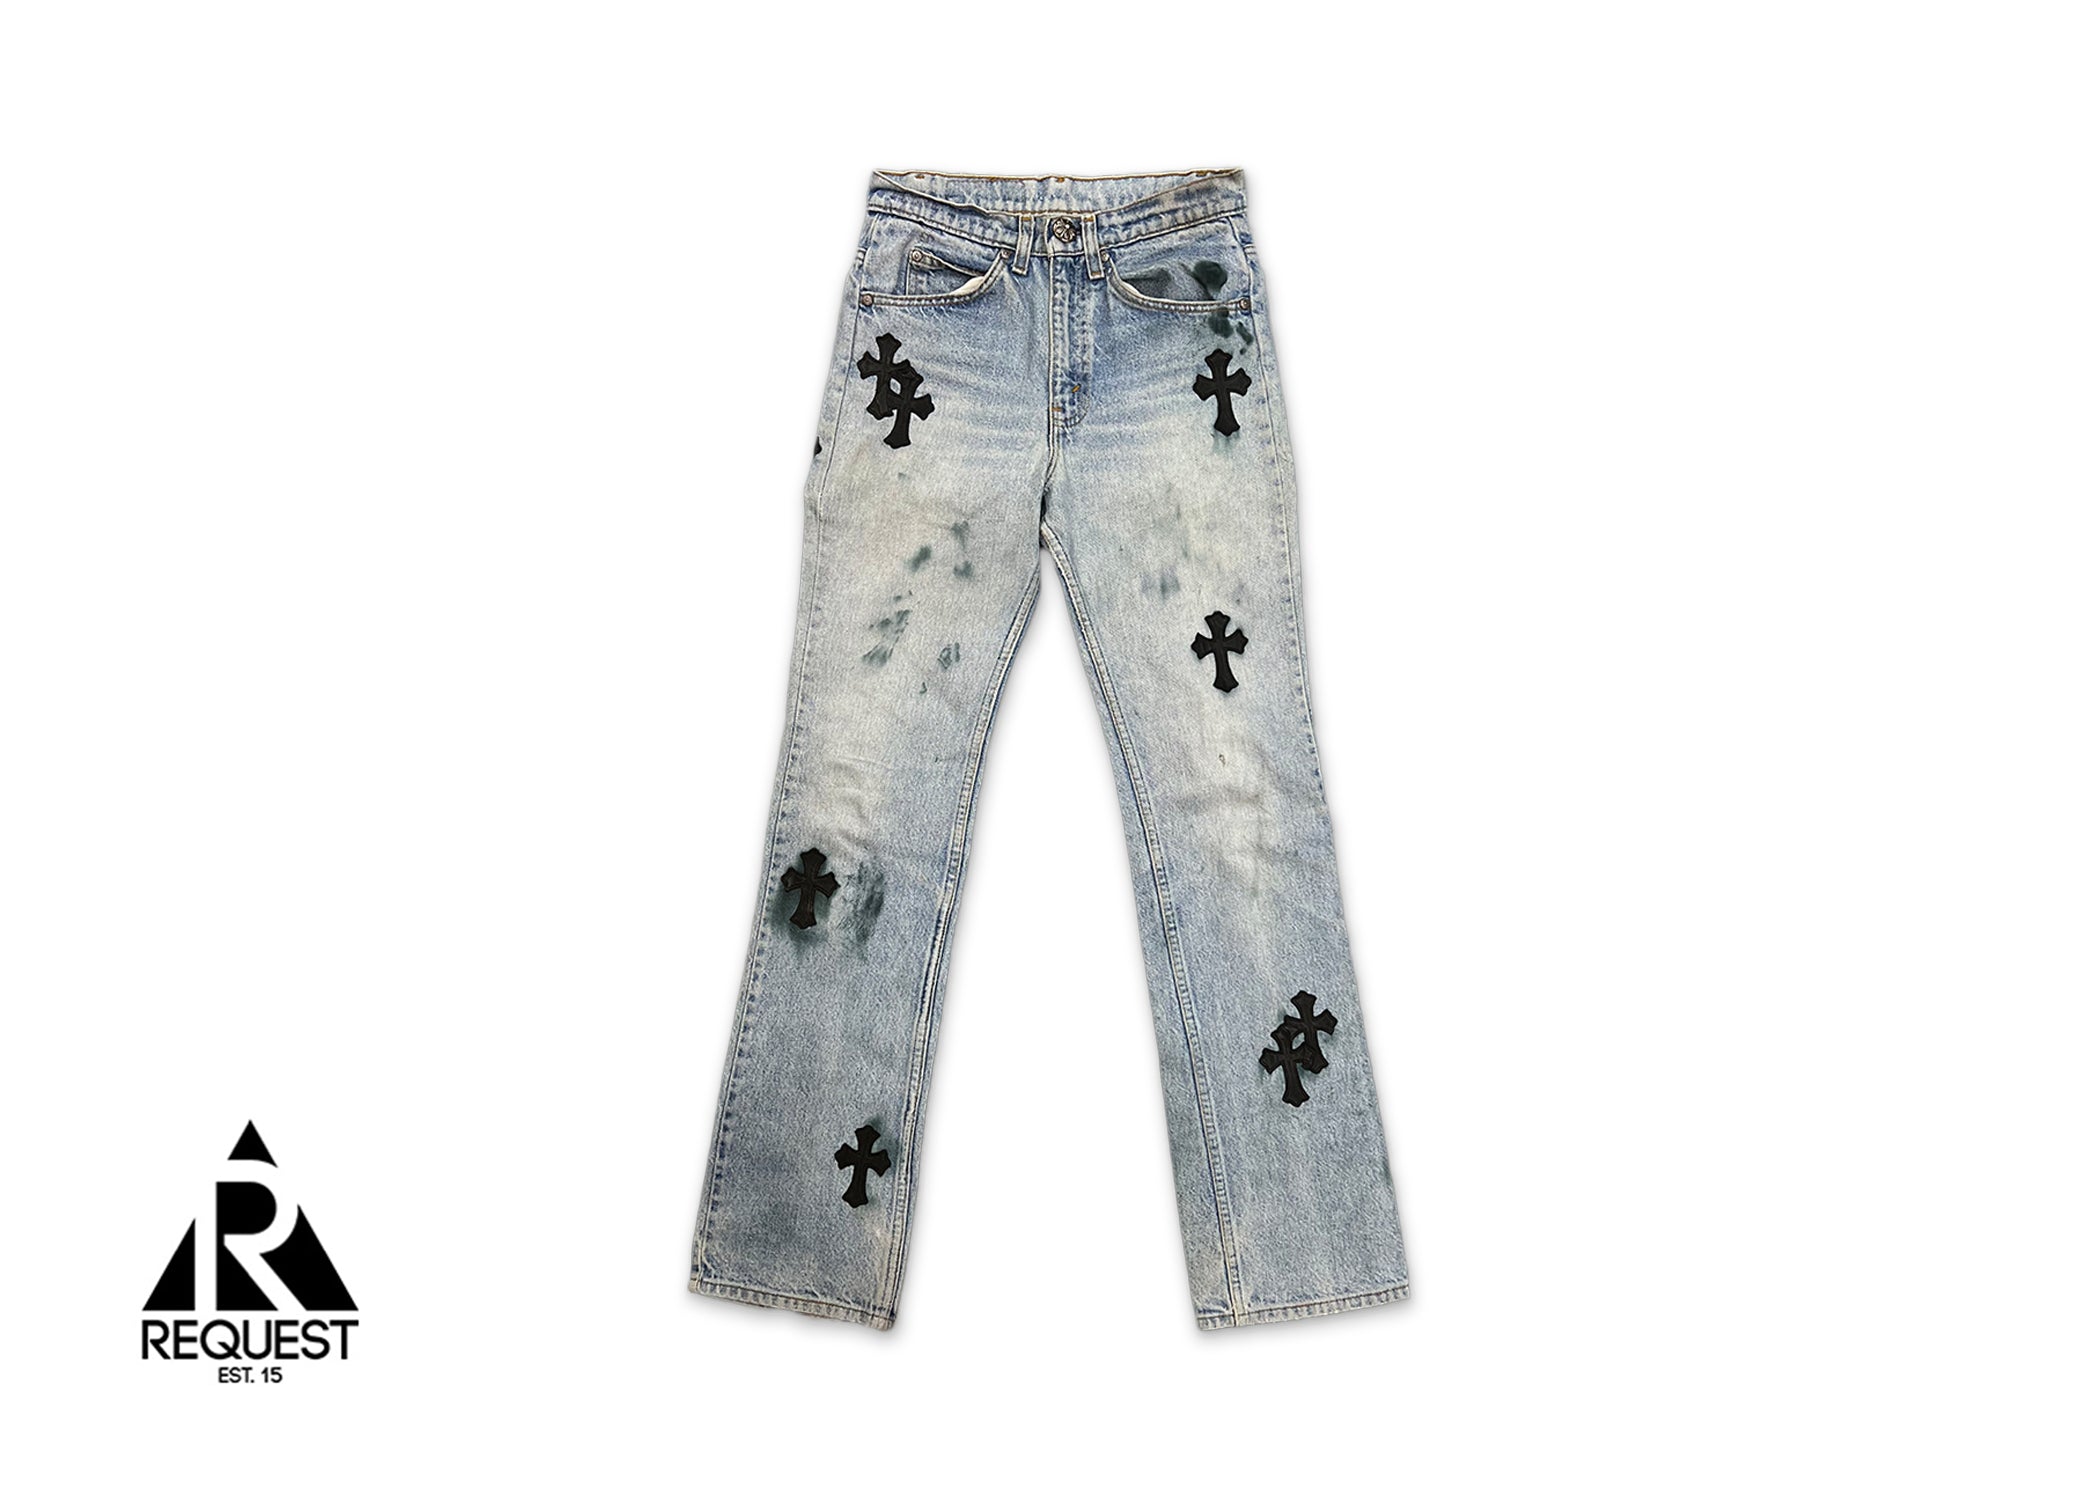 Chrome Hearts Blue Denim Jeans With Blue Cross Patches Size 34x31 *CUSTOM*